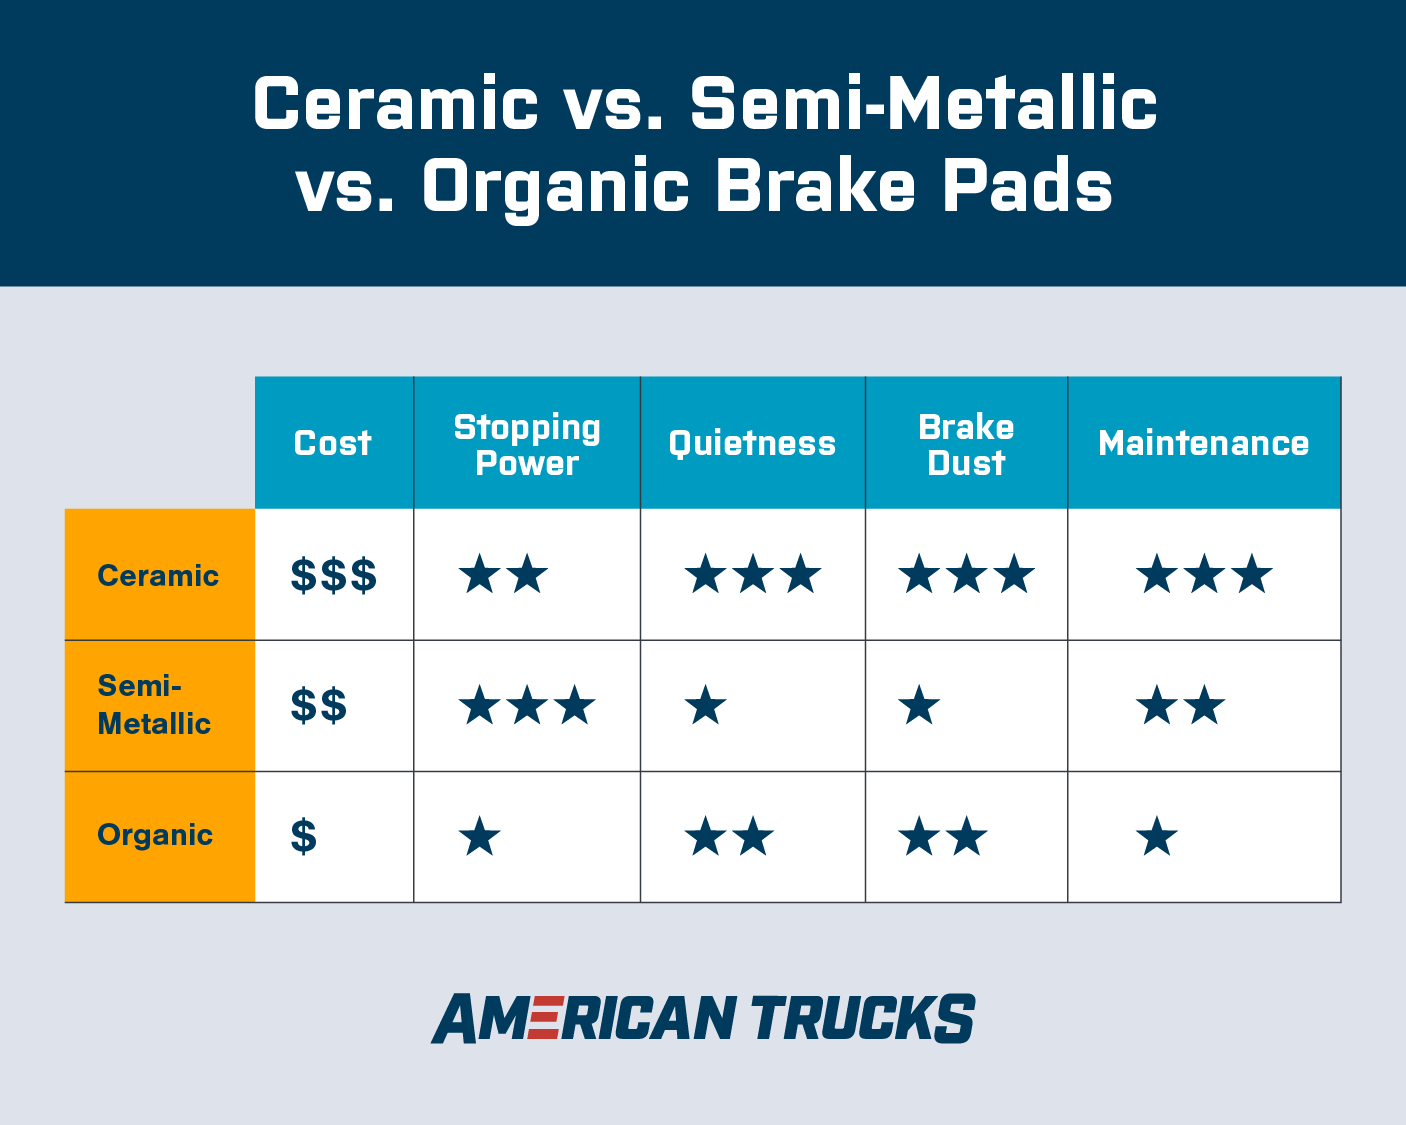 Chart showing rankings in cost, stopping power, quietness, brake dust, and maintenance for ceramic, semi-metallic, and organic brake pads